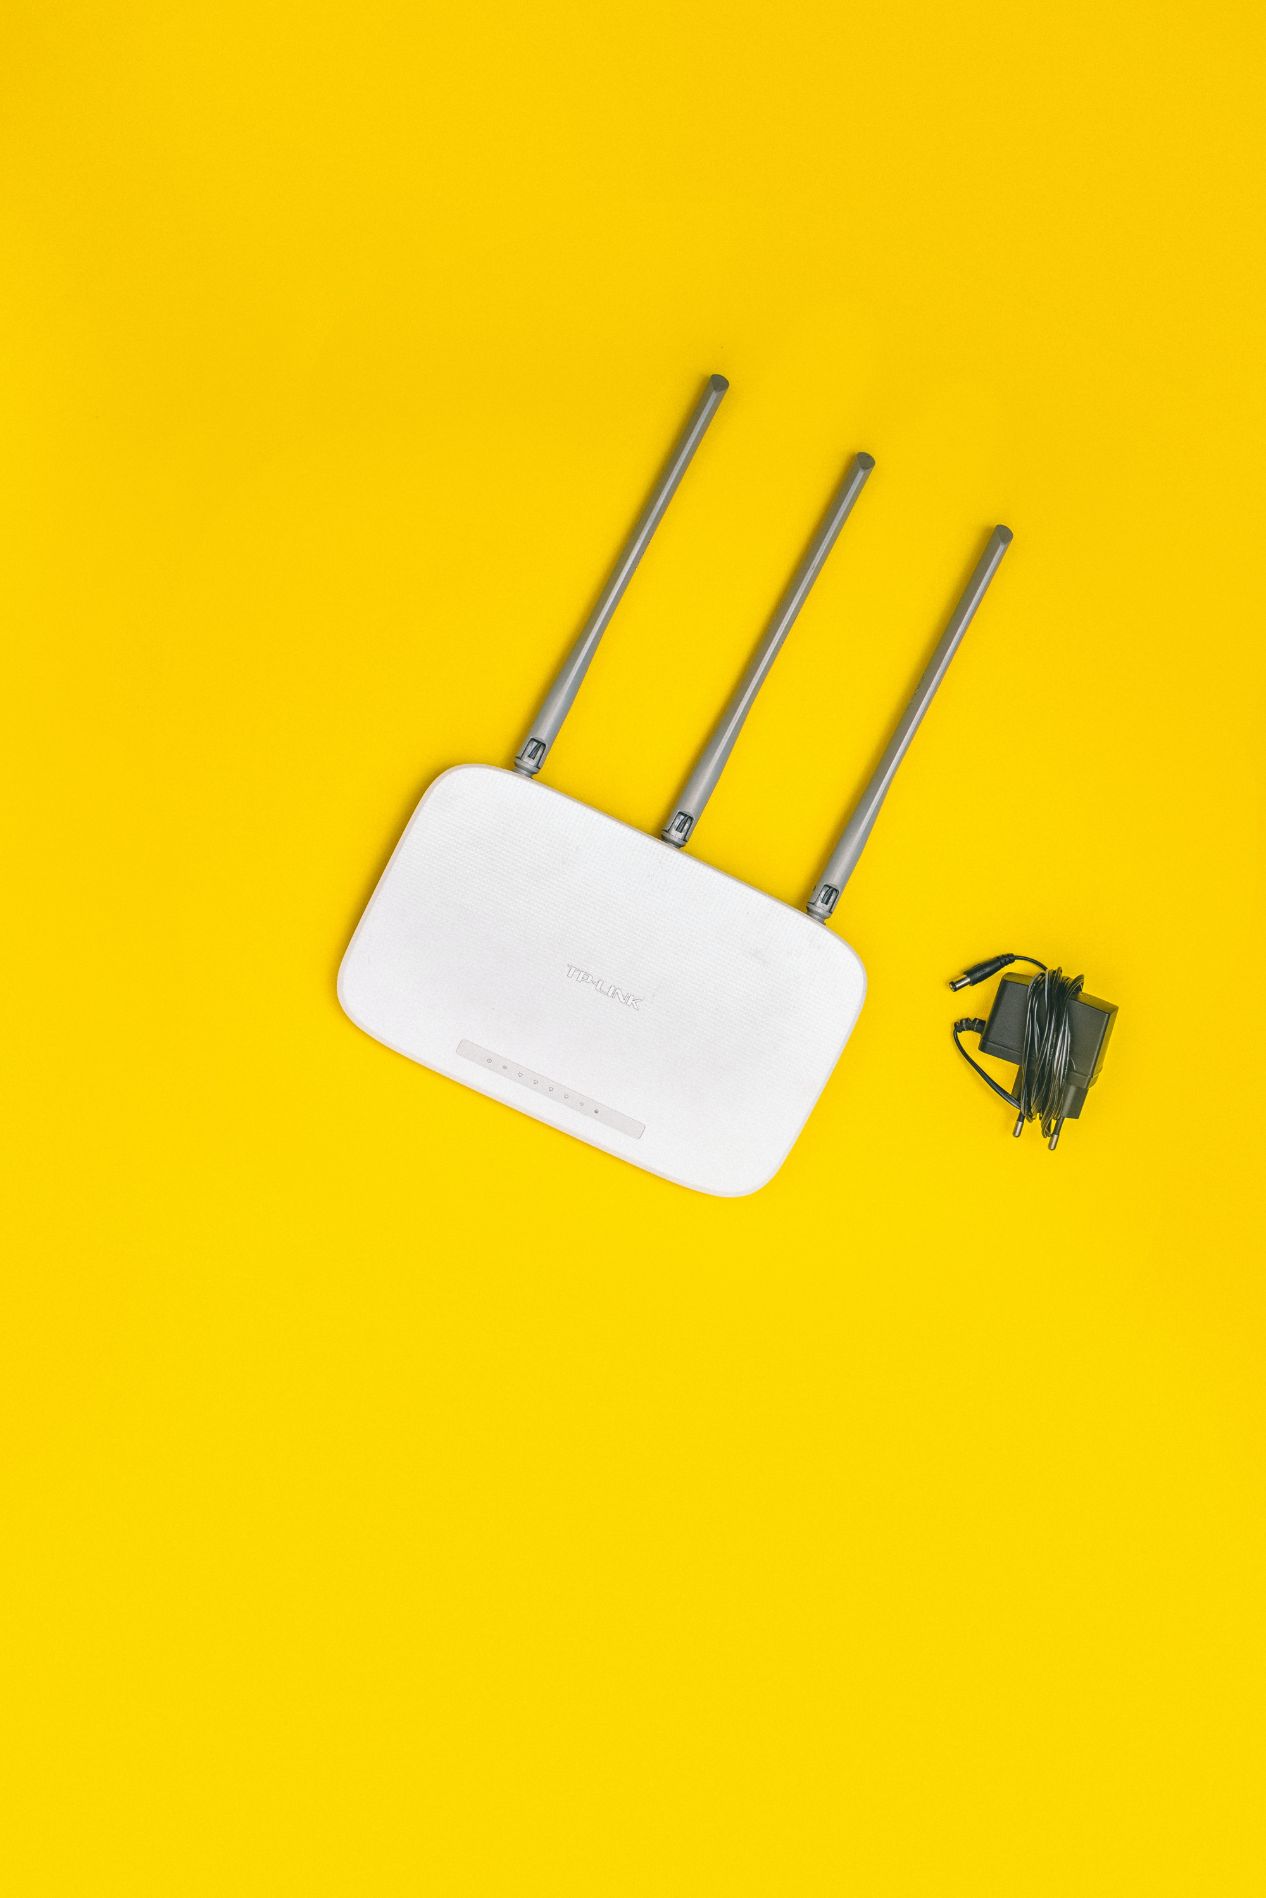 WiFi router on yelow background